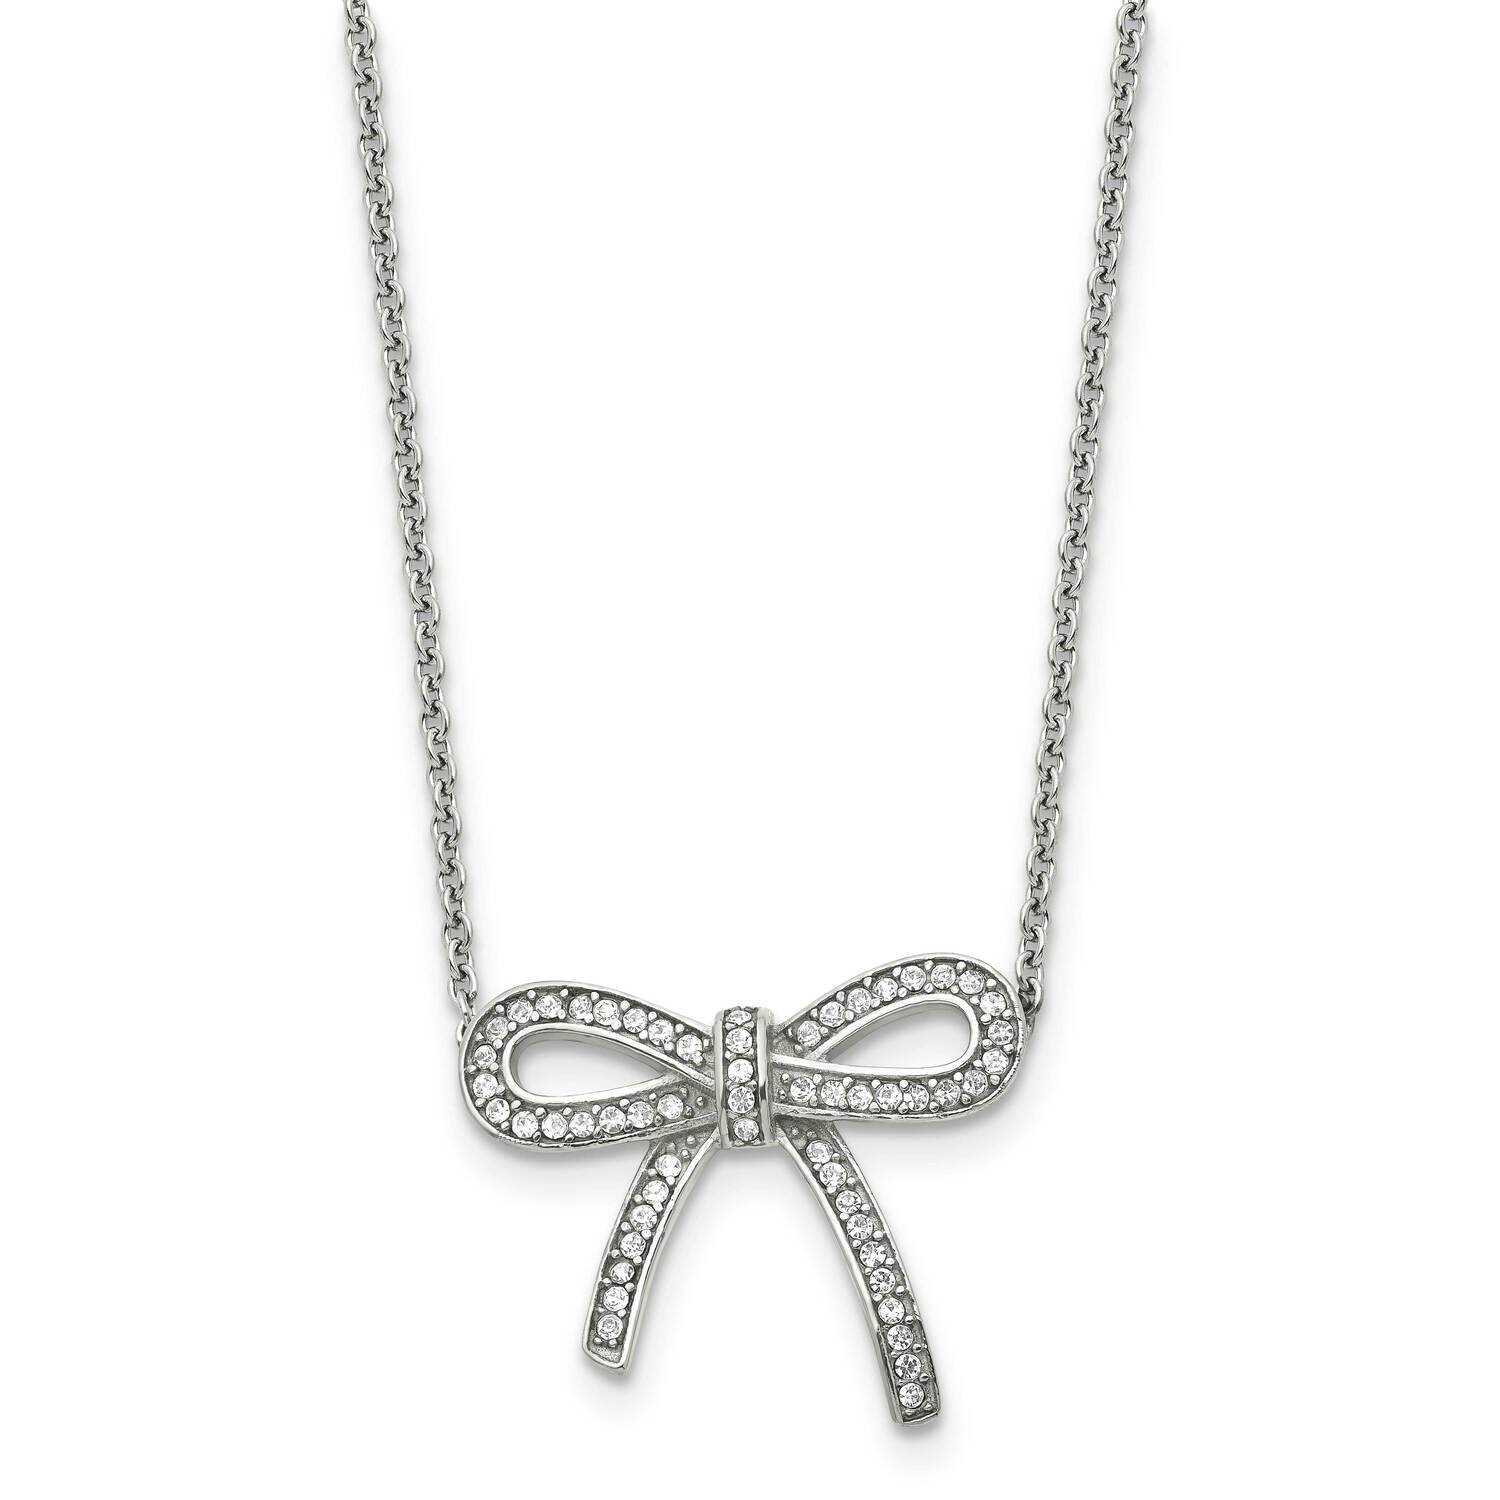 Crystal Polished Bow with 1.75 Inch Extension Necklace Stainless Steel SRN1448-16.25